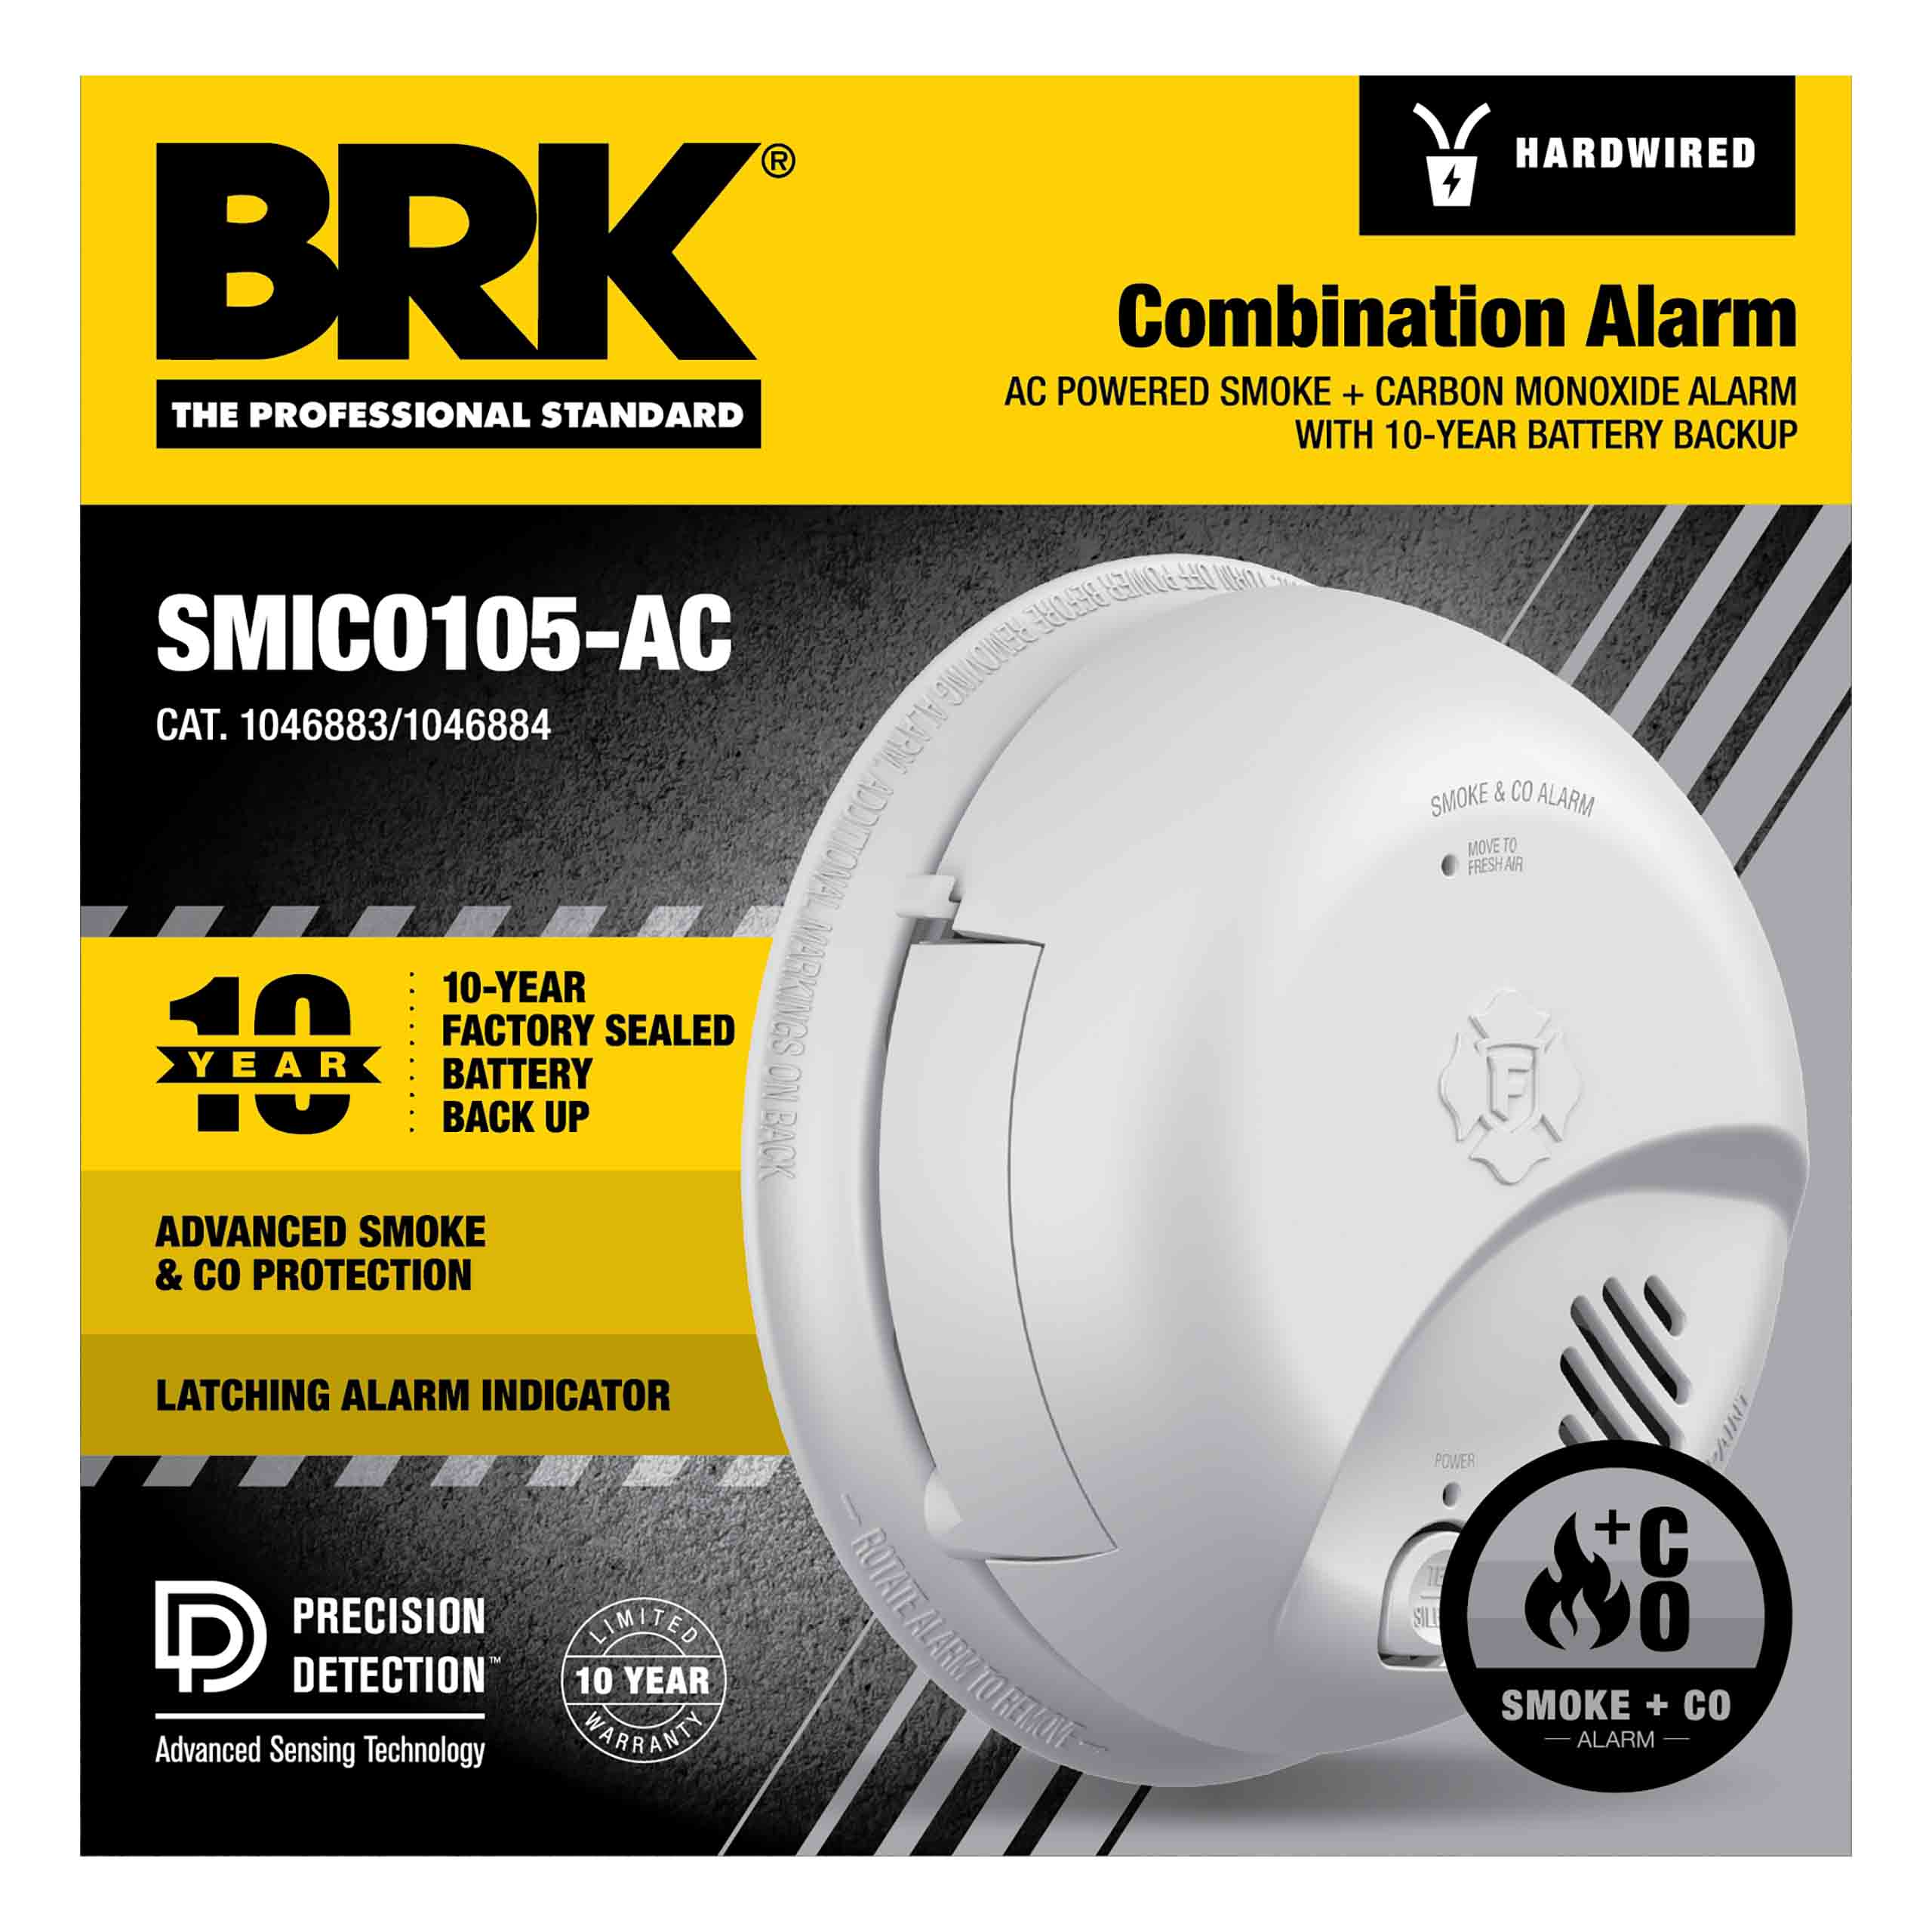 First Alert Carbon Monoxide and Smoke Detector (Combo Pack) - SCO403  (1039879)